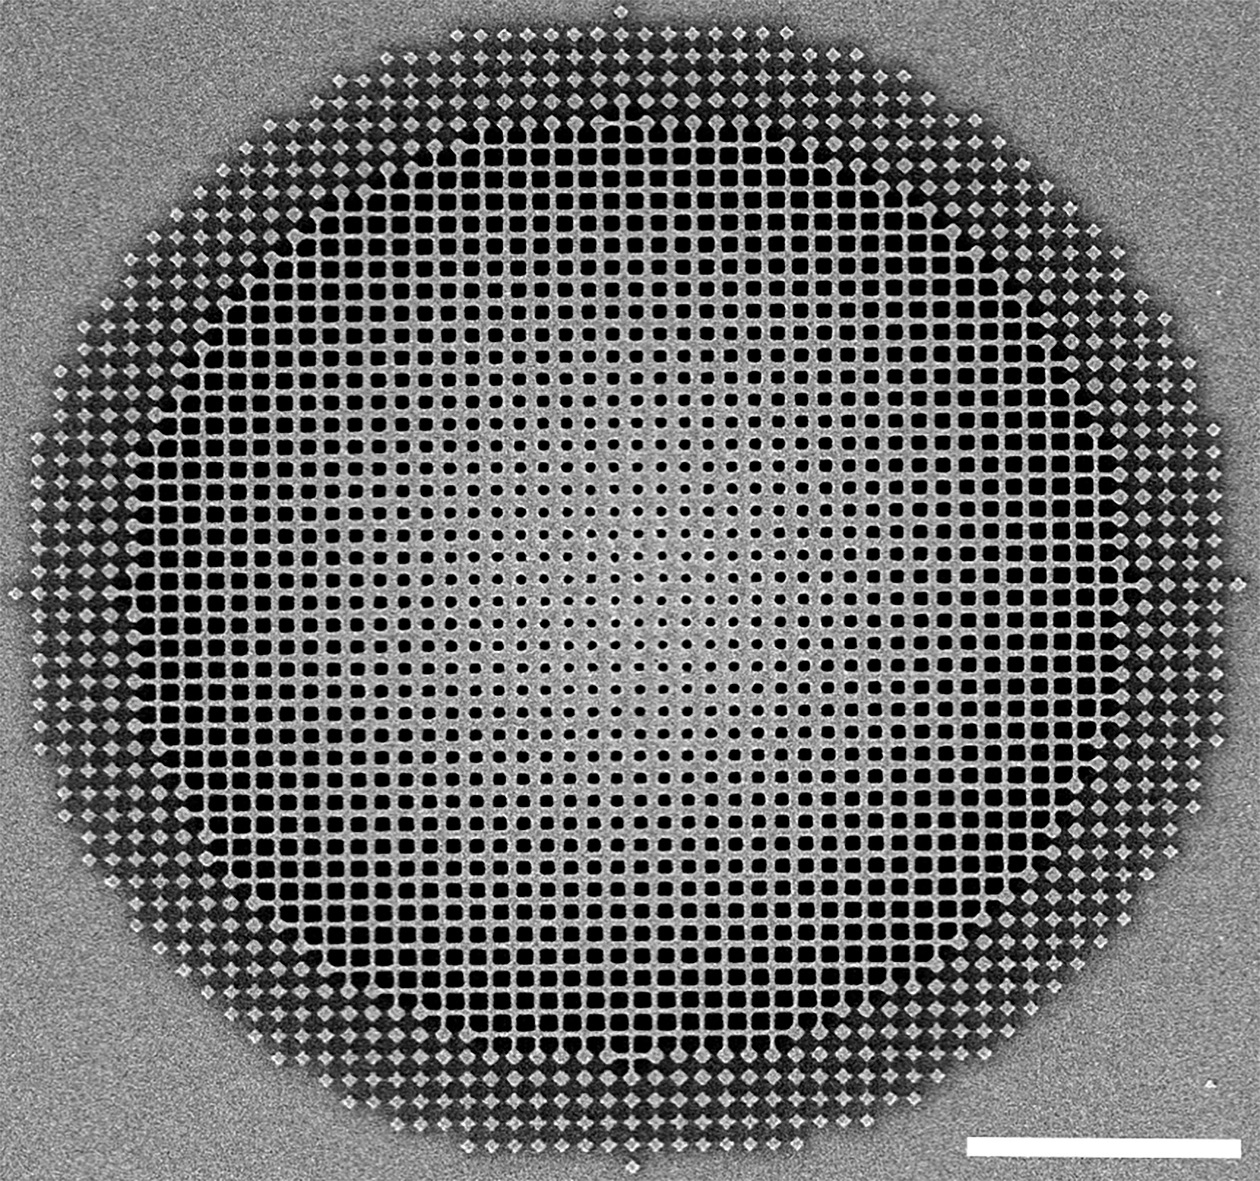 Shown is the fishnet achromatic metalens developed by Berkeley engineers.